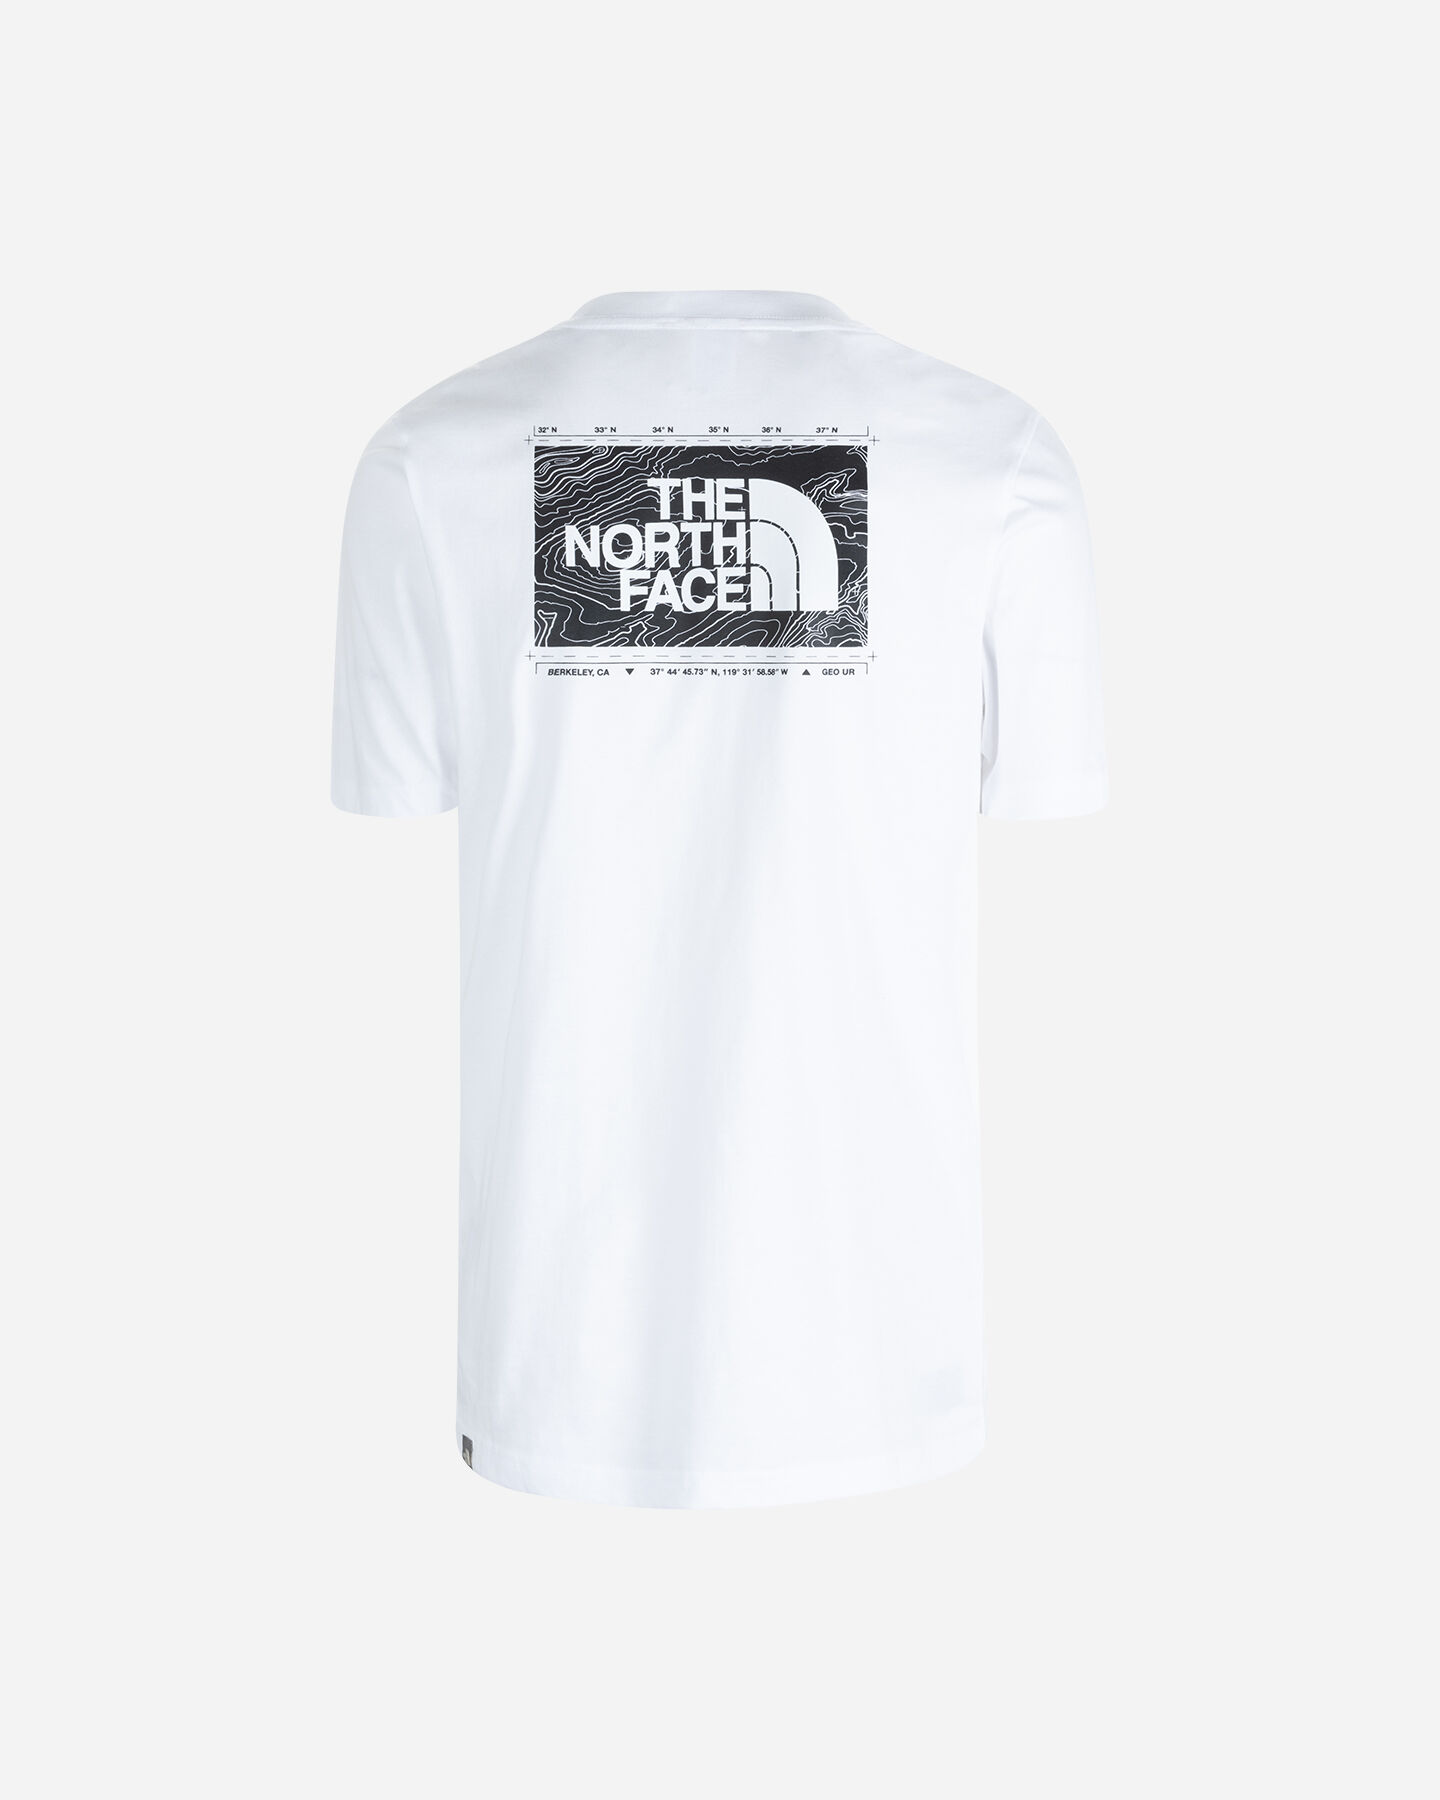  T-Shirt THE NORTH FACE NEW ODLES M S5537253|FN4|S scatto 1